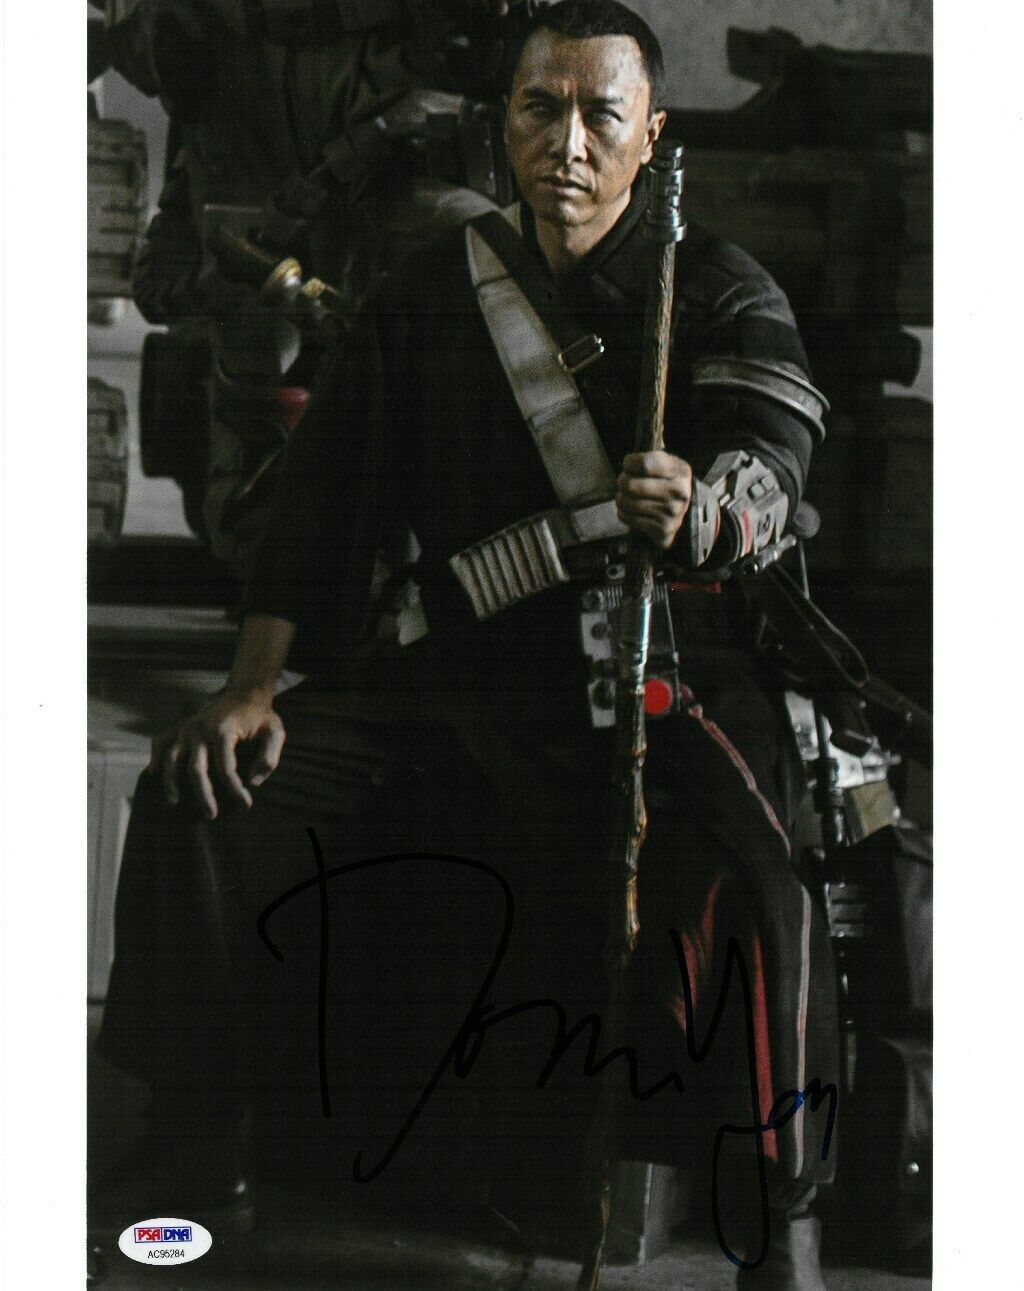 Donnie Yen Signed Star Wars Authentic Autographed 11x14 Photo Poster painting PSA/DNA #AC95284